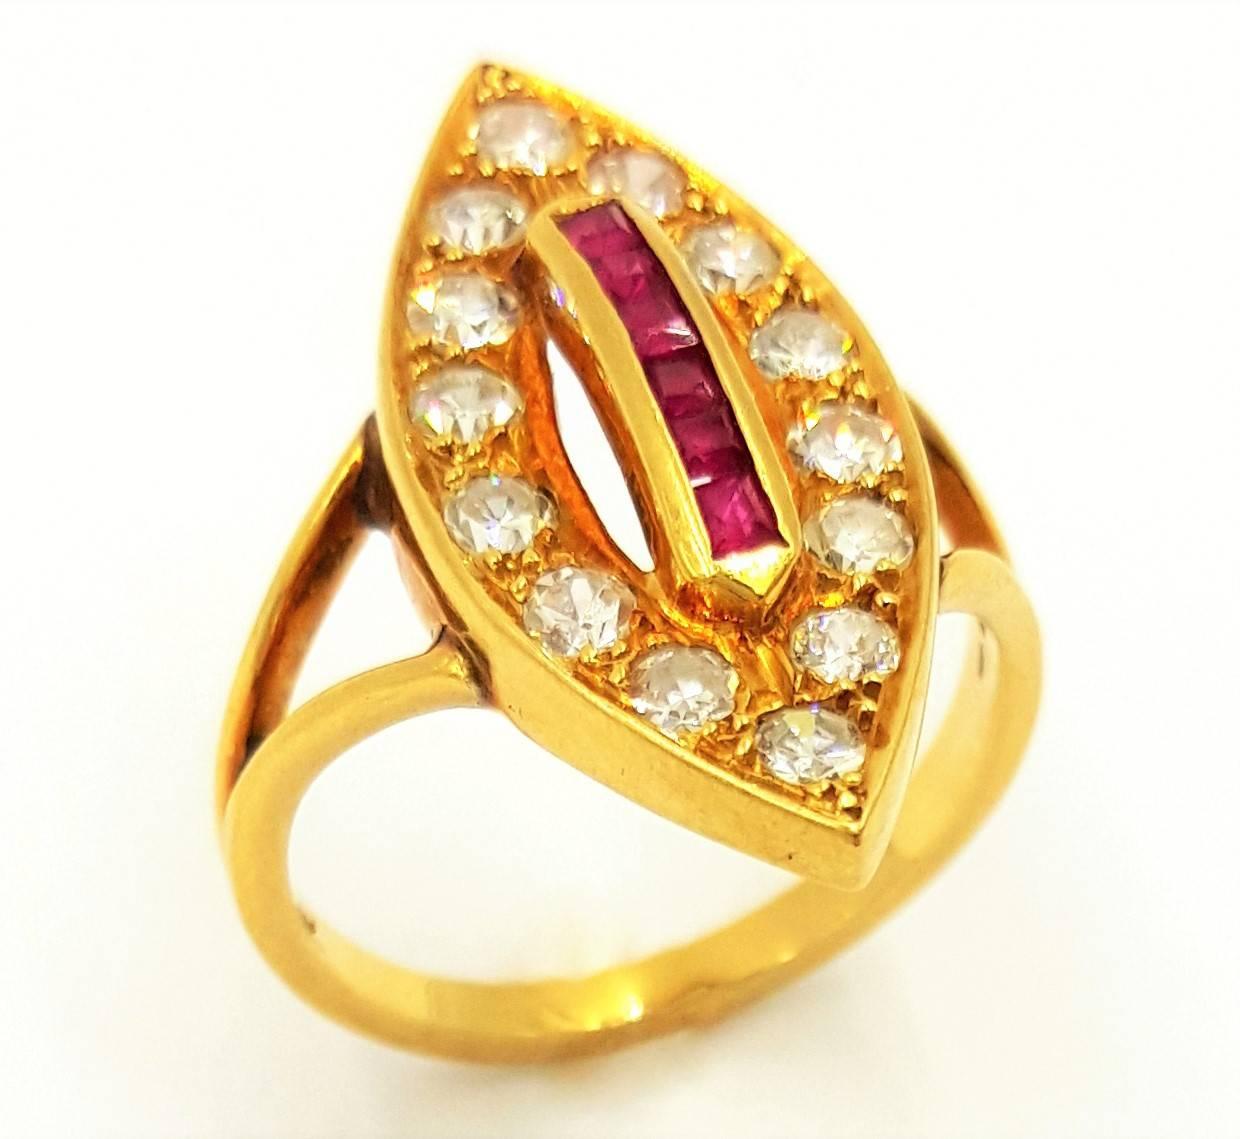 This Breathtaking Retro 18kt Gold With .50 Carat of Vivid Pinkish Red Calibrated Step Cut Rubies Surrounded by 1 Carat of VS clarity, and H Colorless White, Gorgeous Single Cut Diamond Ring is Spectacular! This ring is dated by the older cuts used